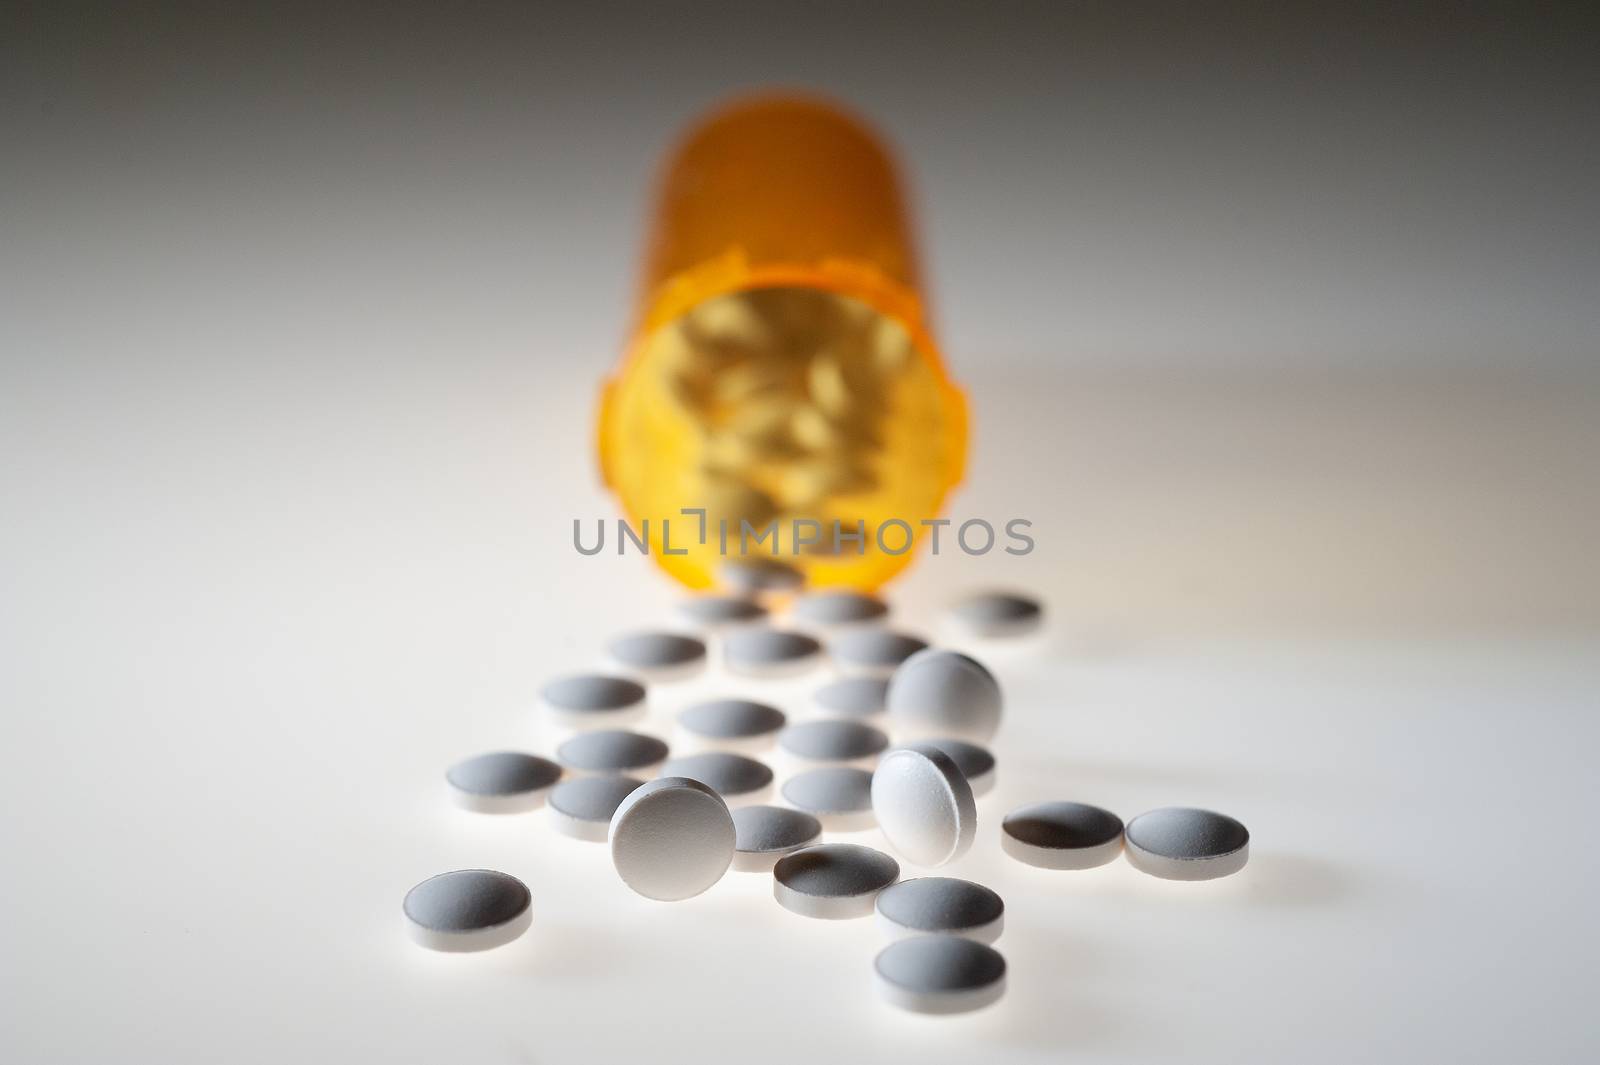 Pills or capsules of medication pouring out of an orange plastic bottle